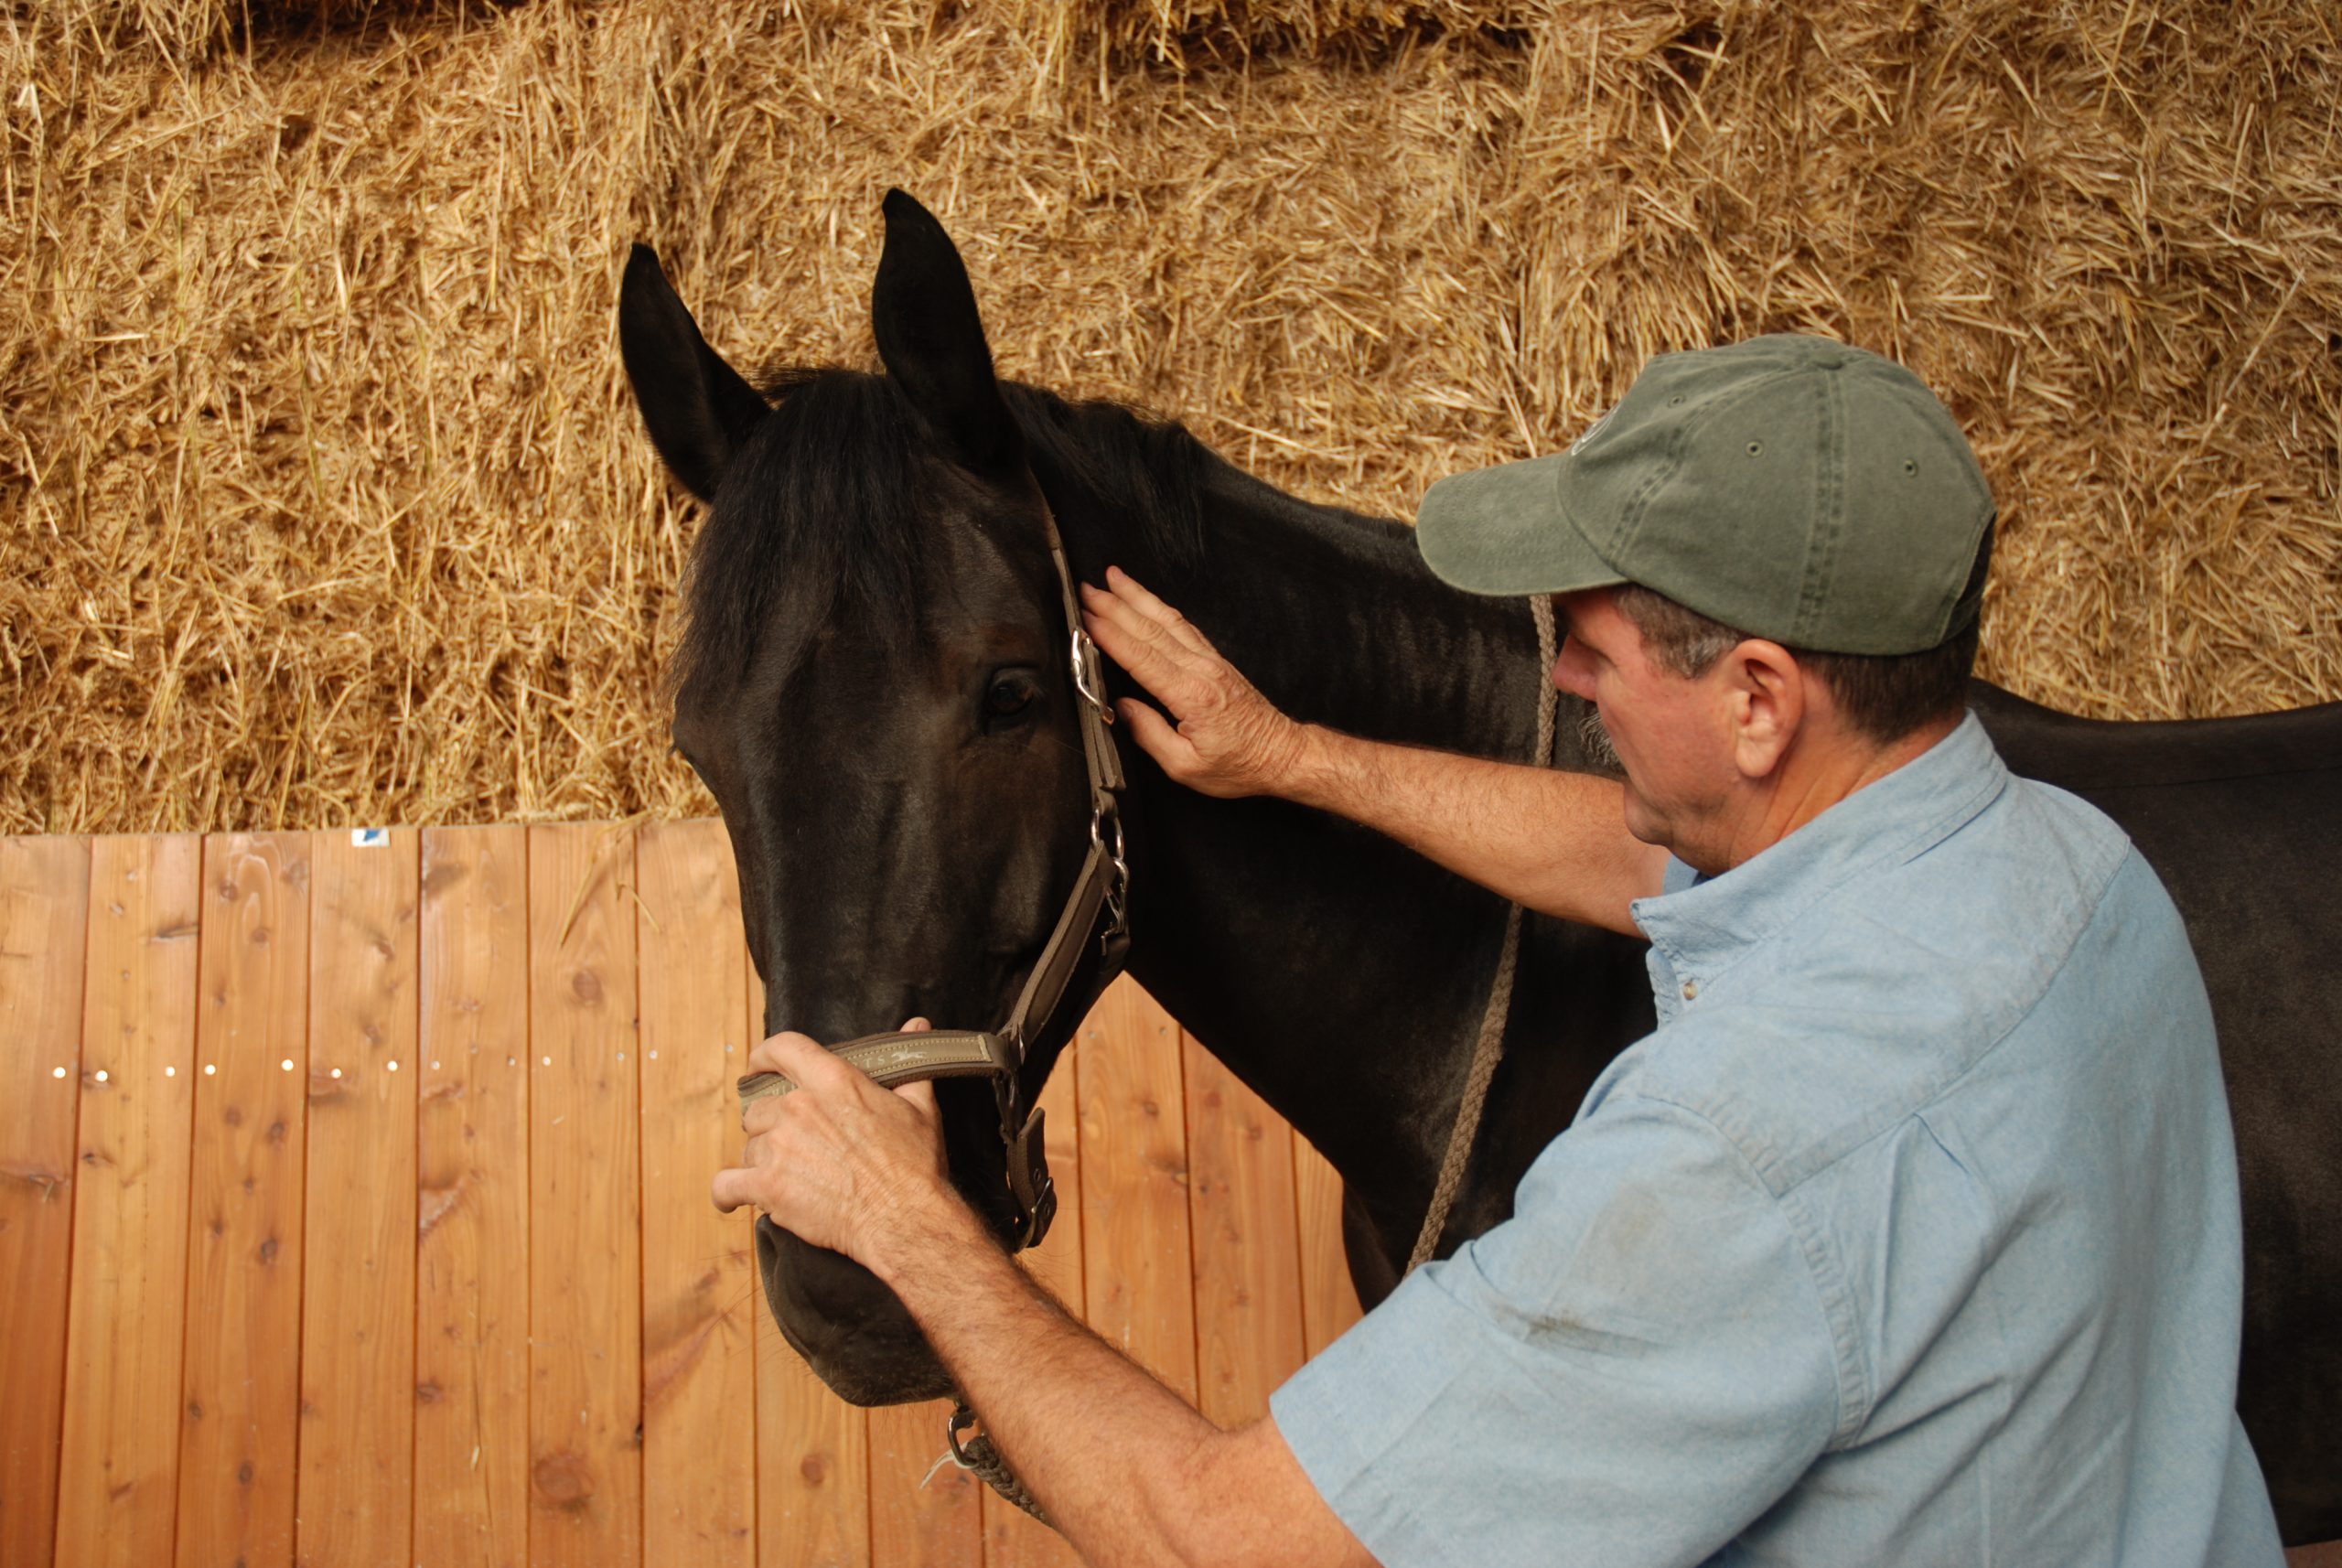 Jim showing soft hands when the horse braces or pulls during LCF